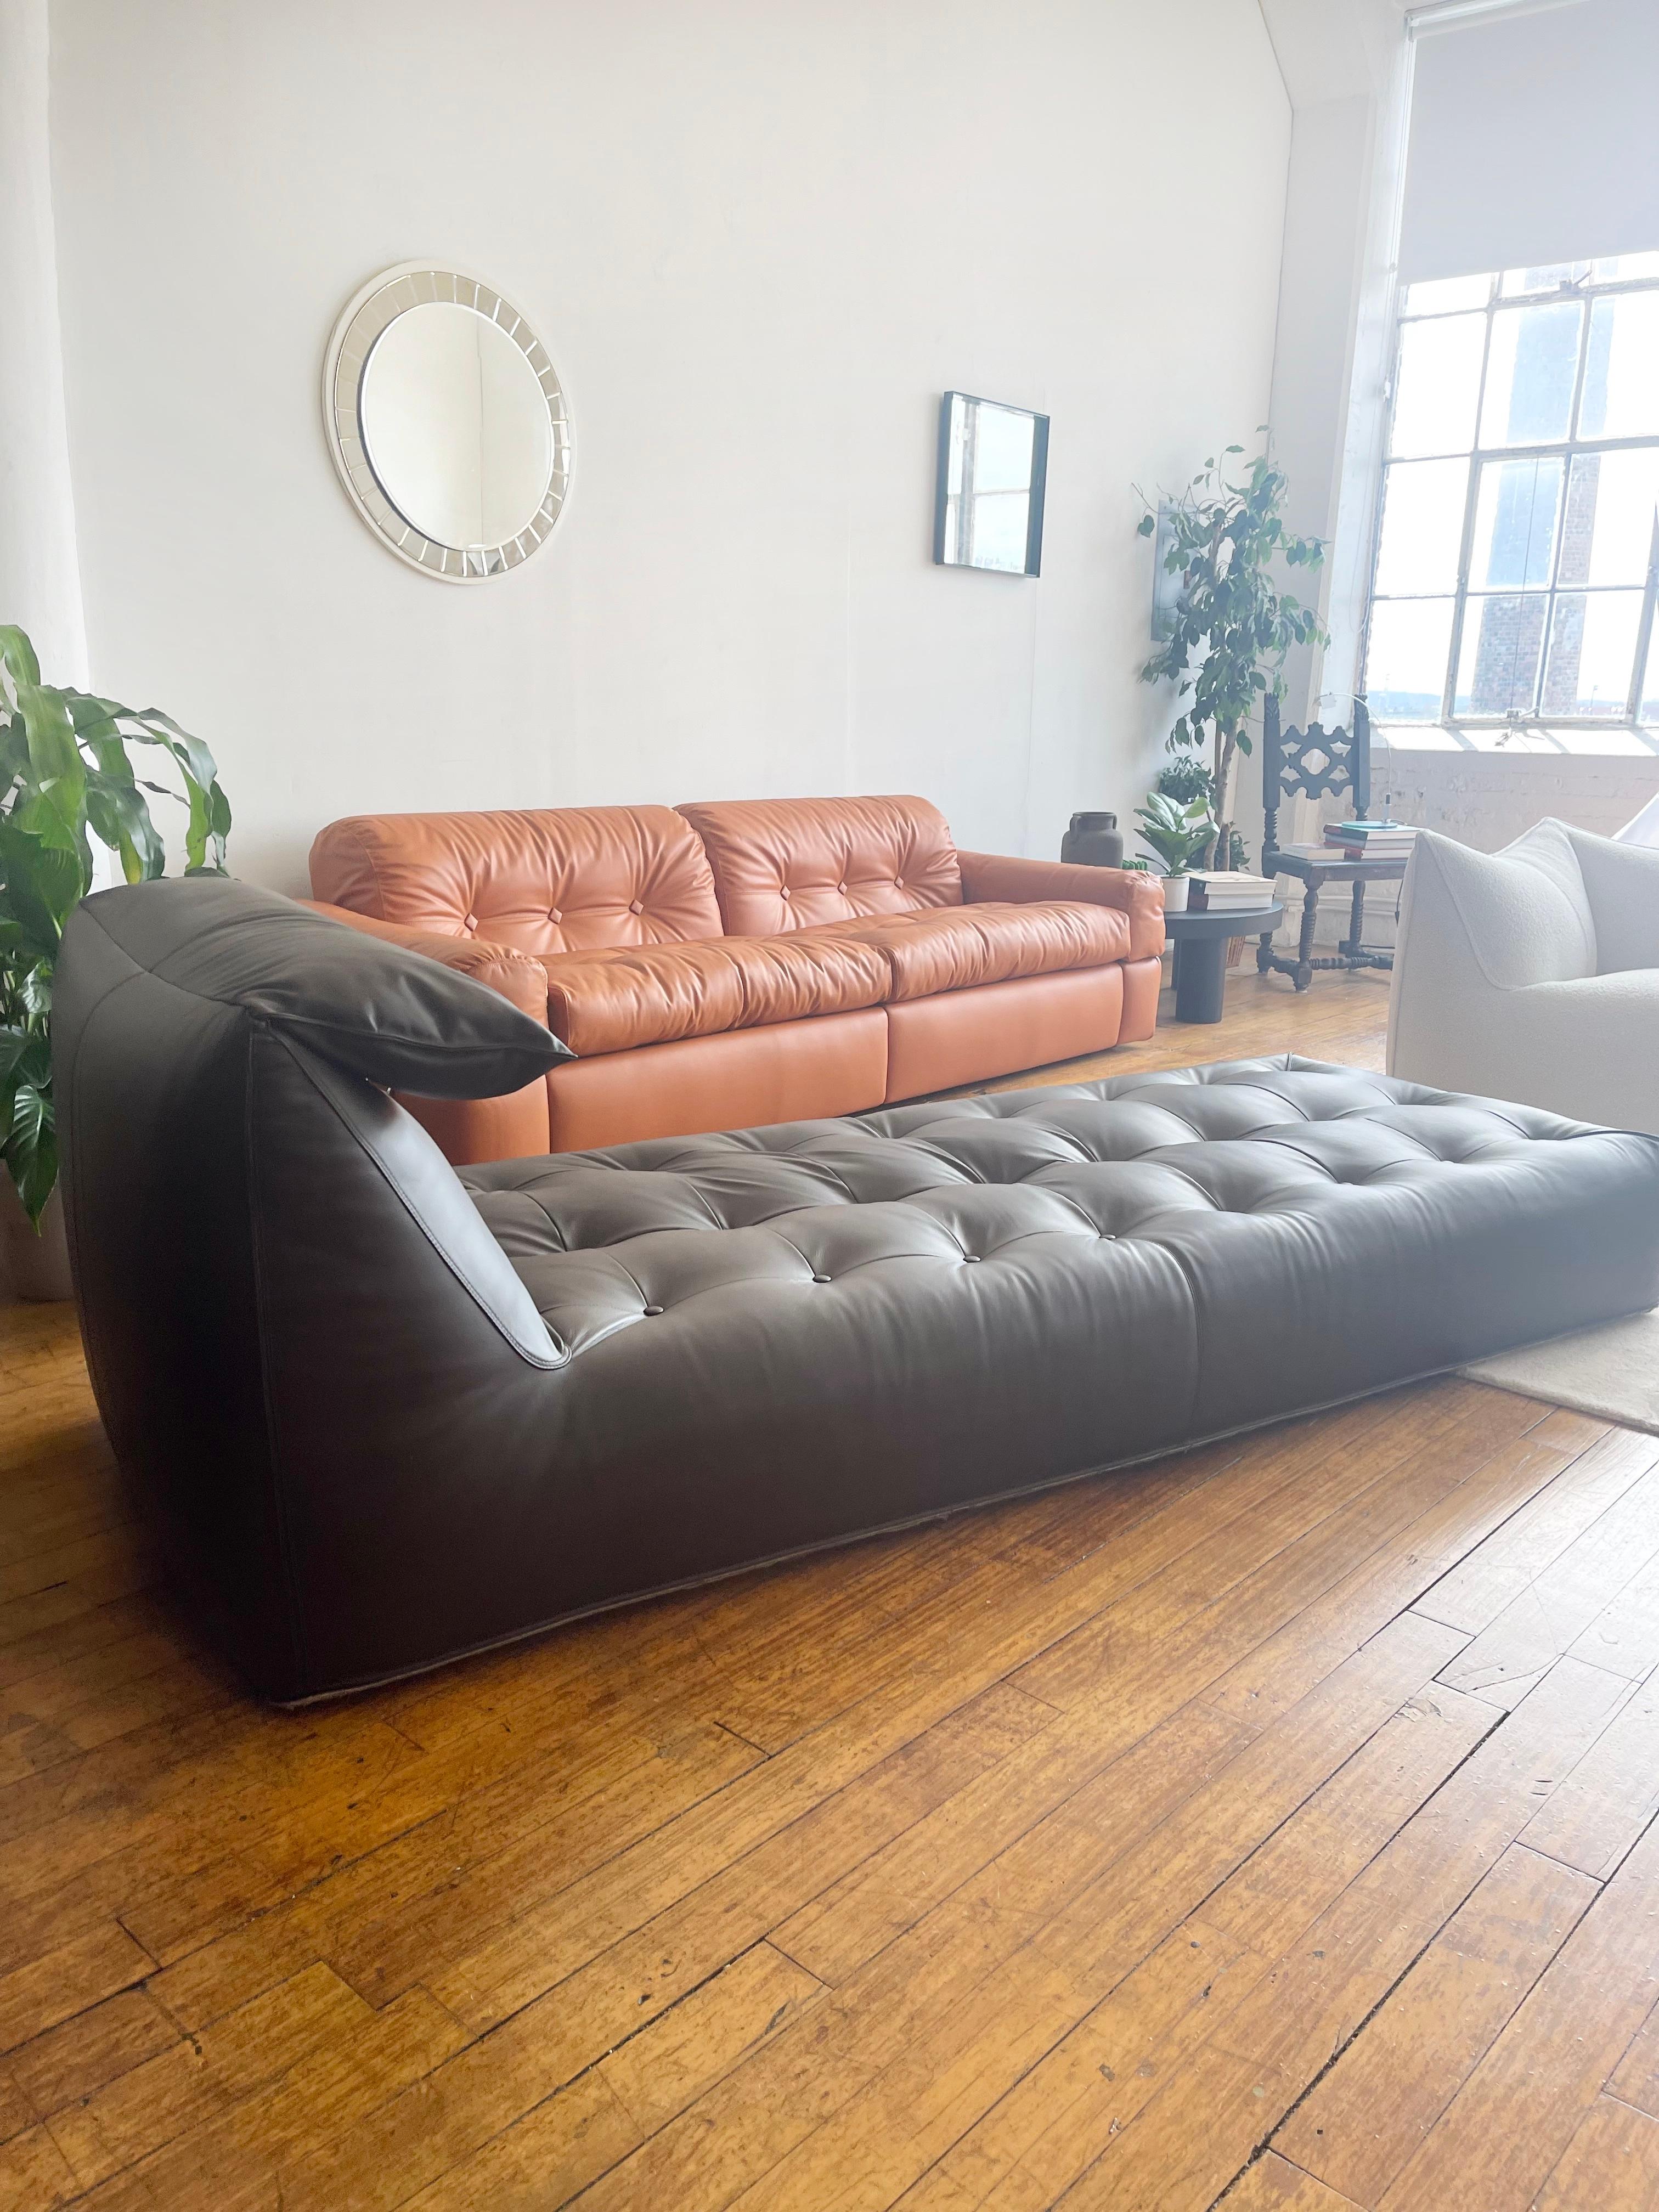 Leather Mario Bellini Le Bambole Daybed 1970s B&B Italia newly upholstered brown leather For Sale